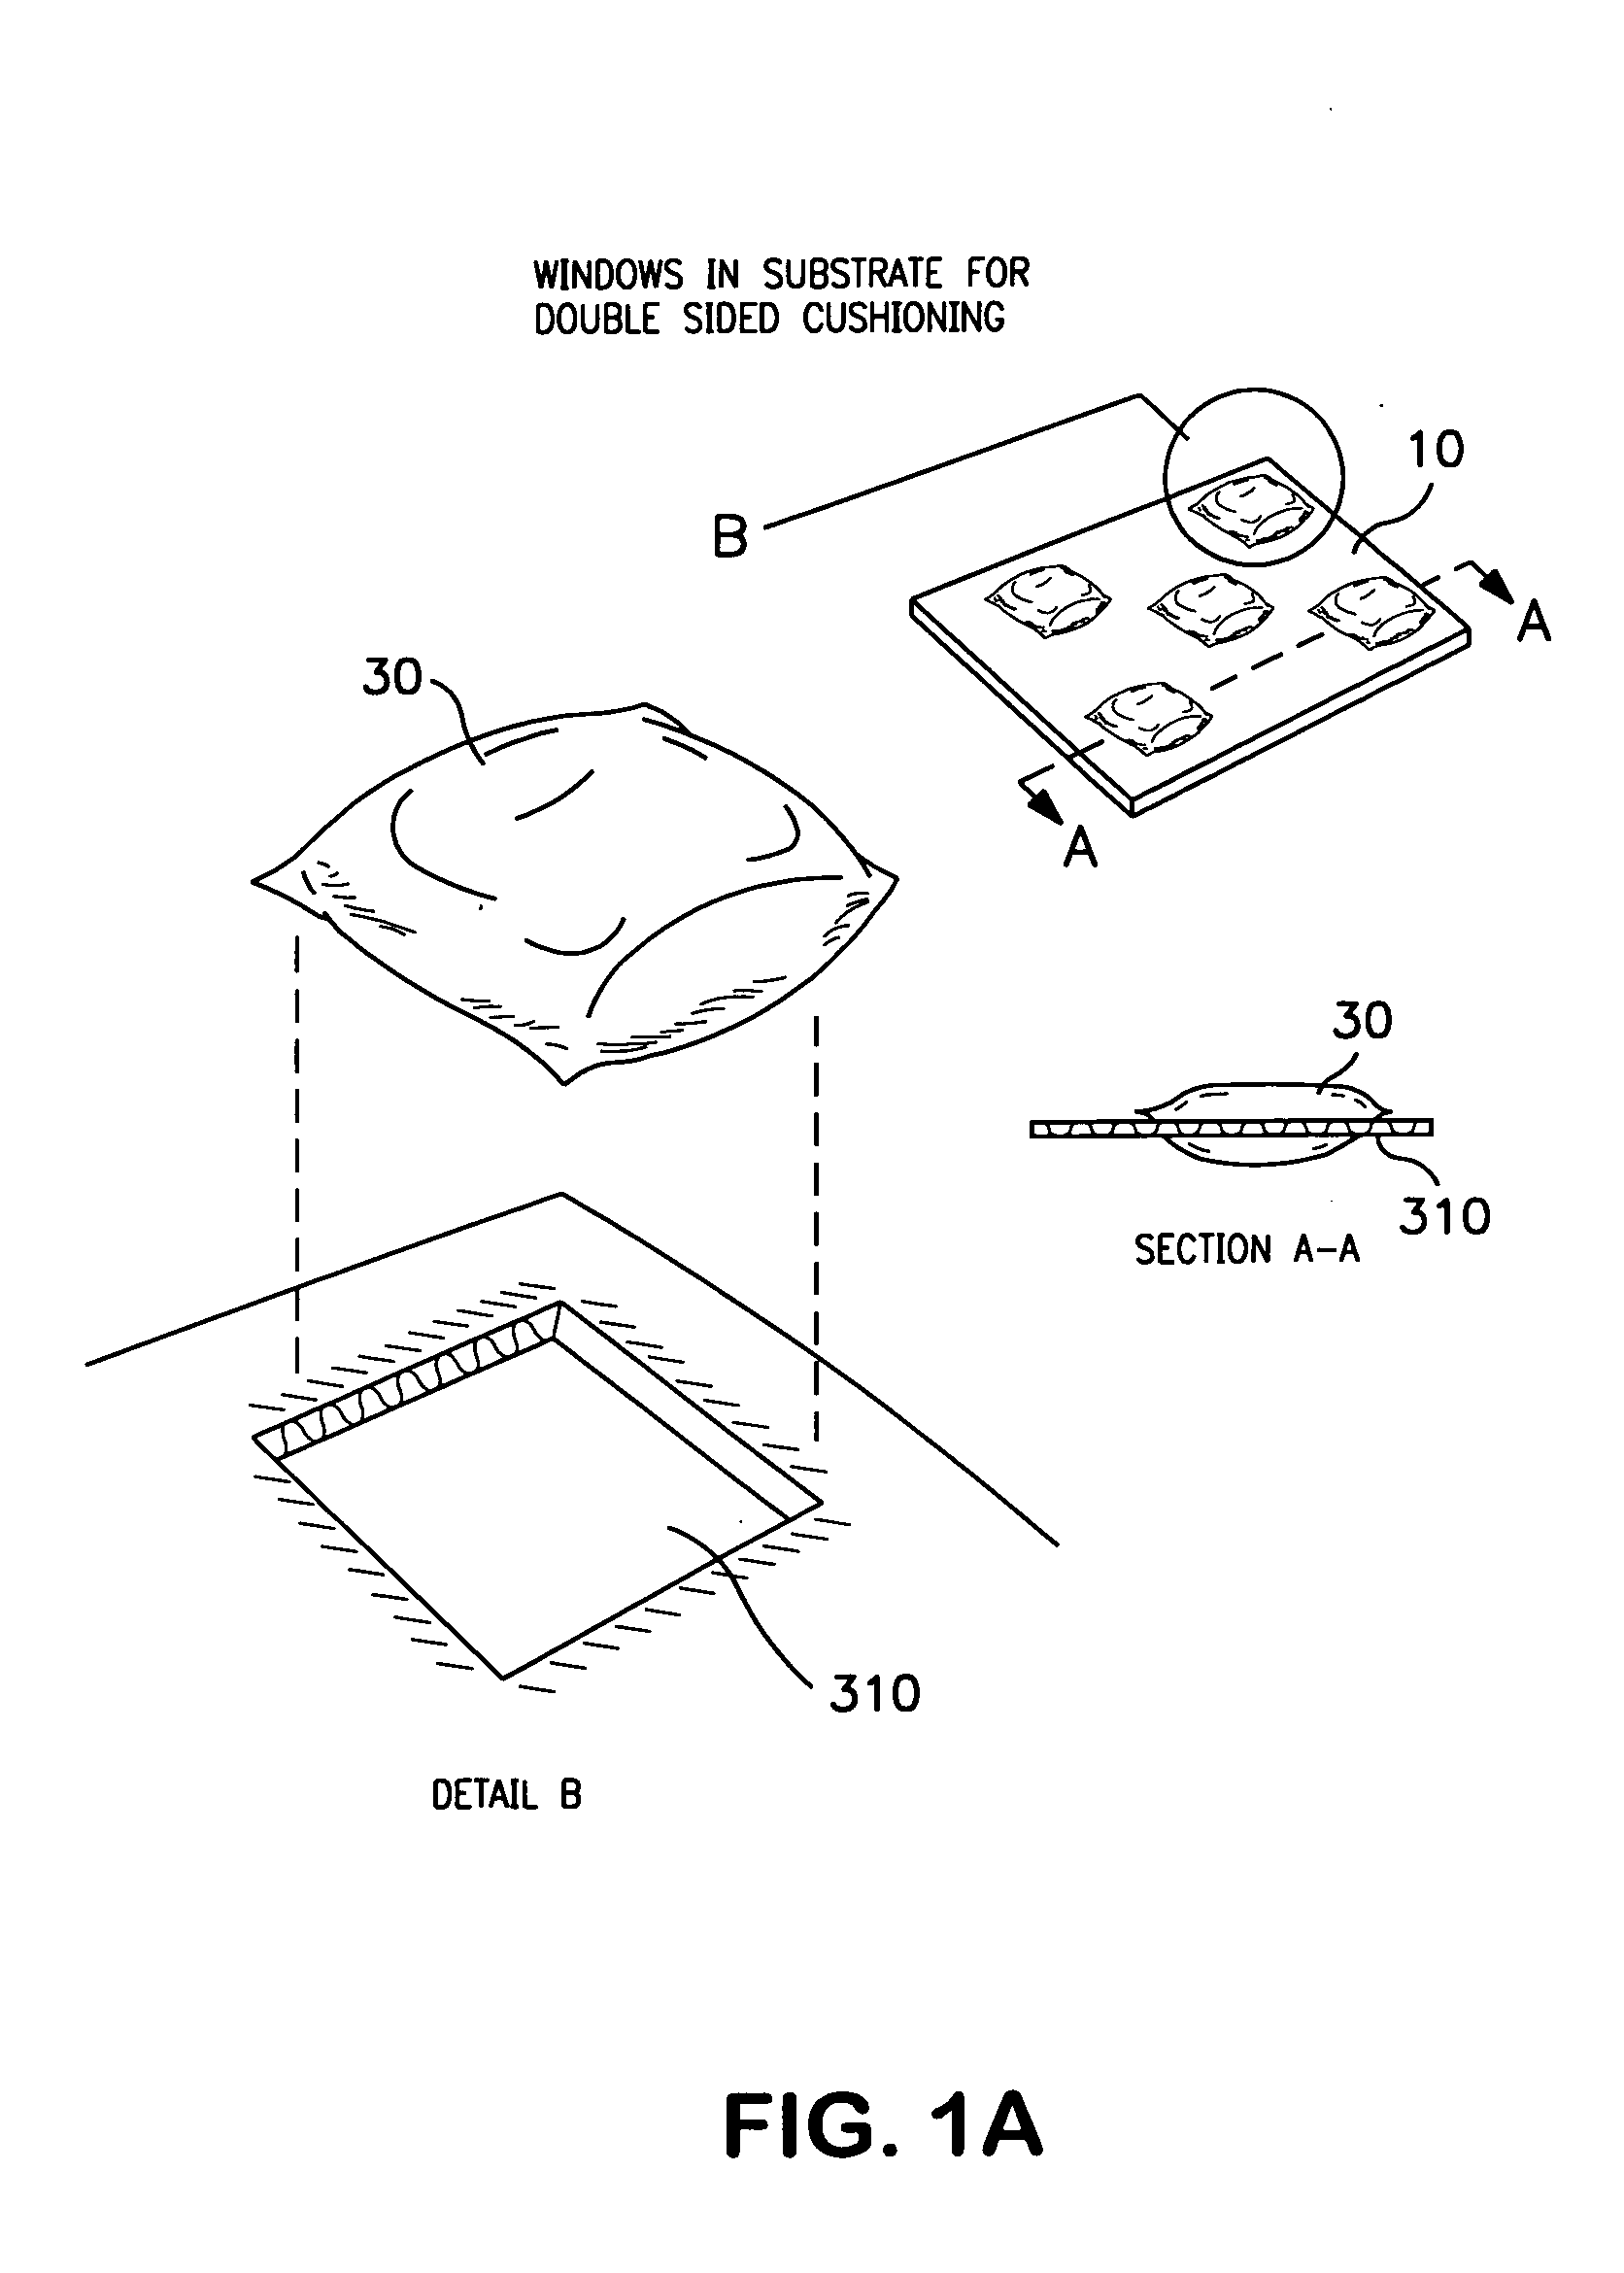 Packaging assemblies and method of fabricating same